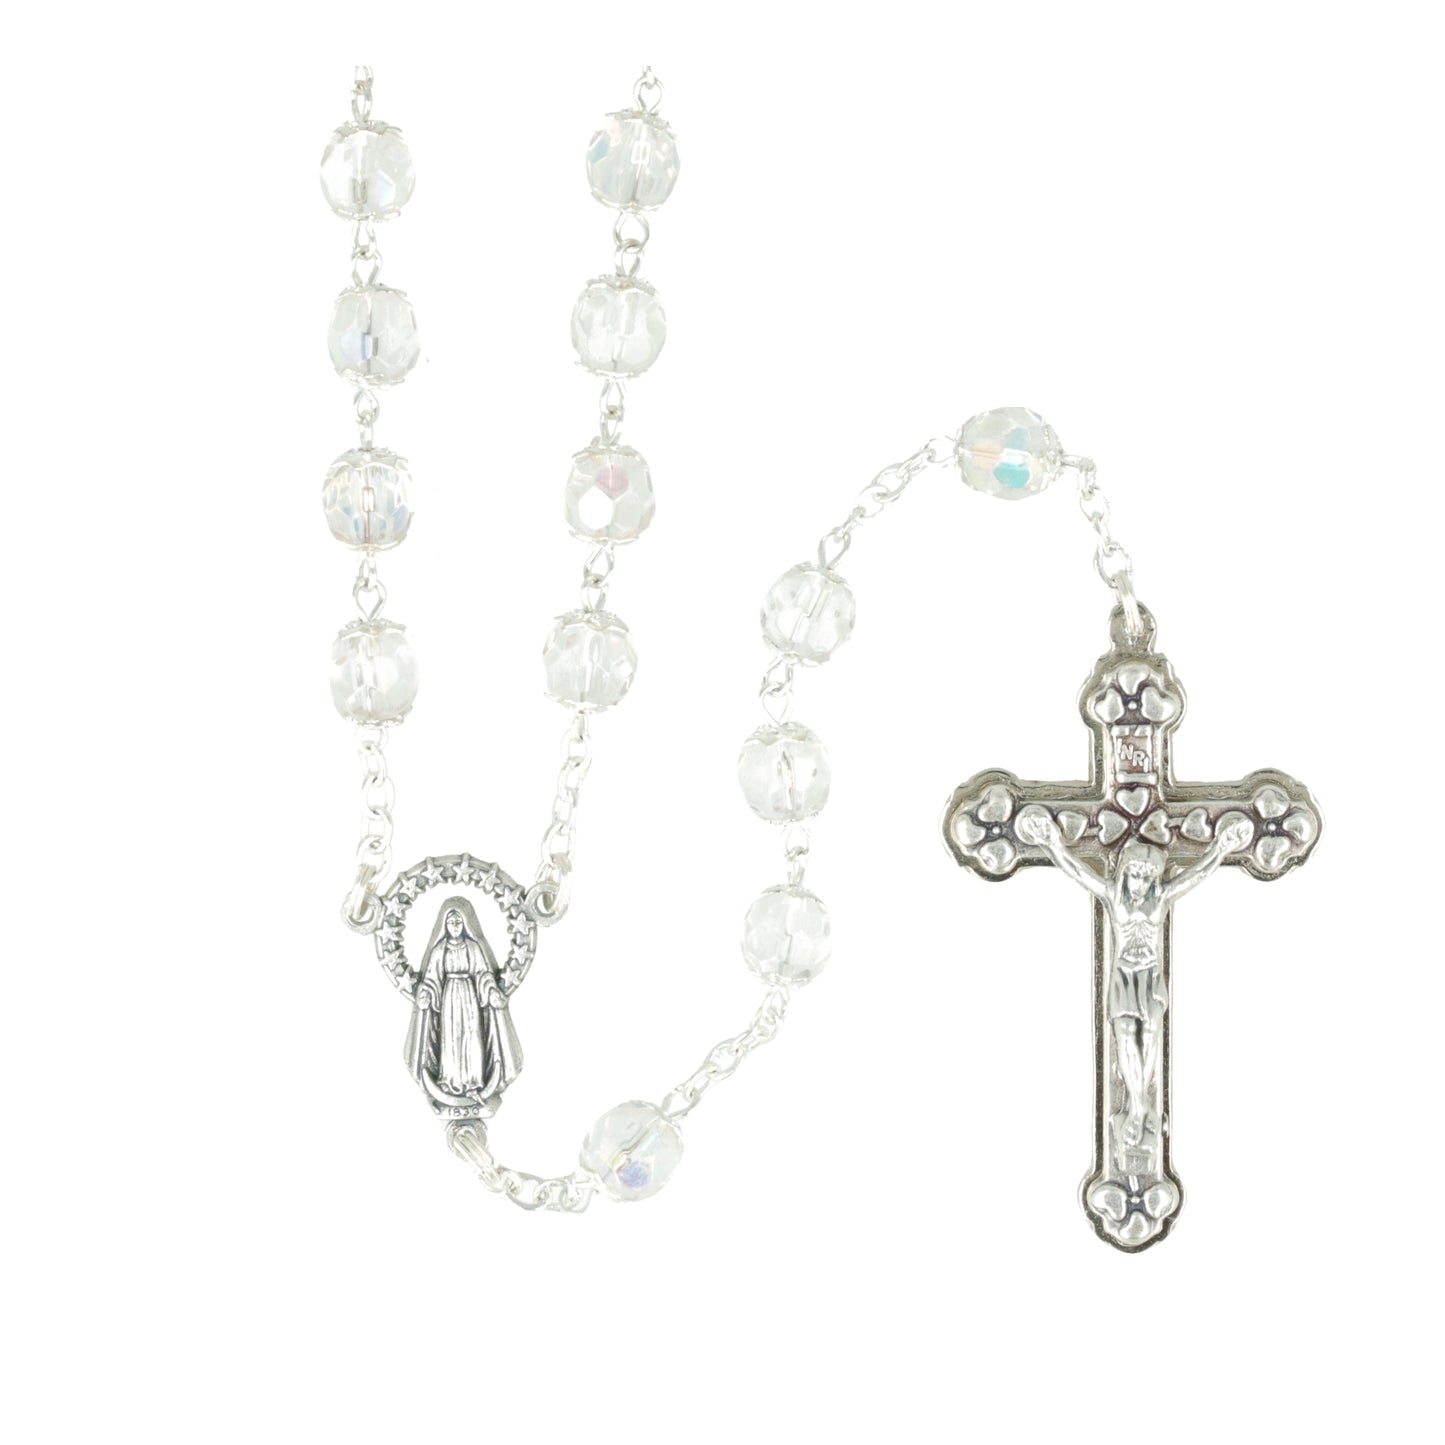 Calotas Crystal Rosary Souvenirs from Italy